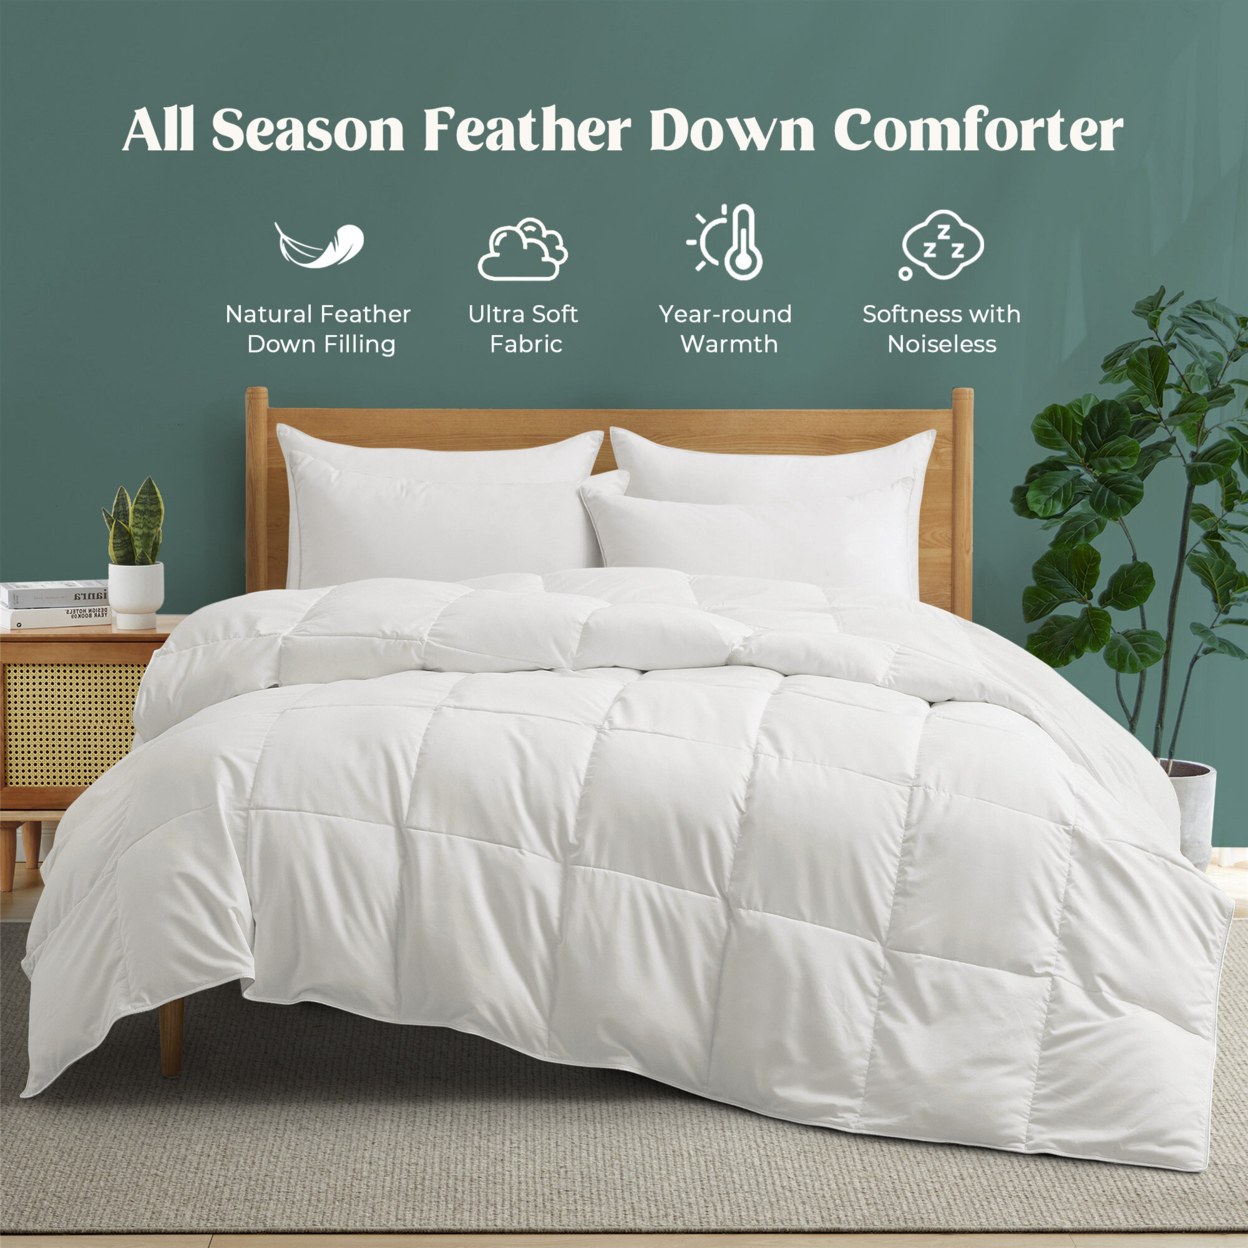 White Goose Feather Fiber And Down Comforter-Lightweight&Medium Weight, Sleep Soundly With Noiseless - Medium Weight, King